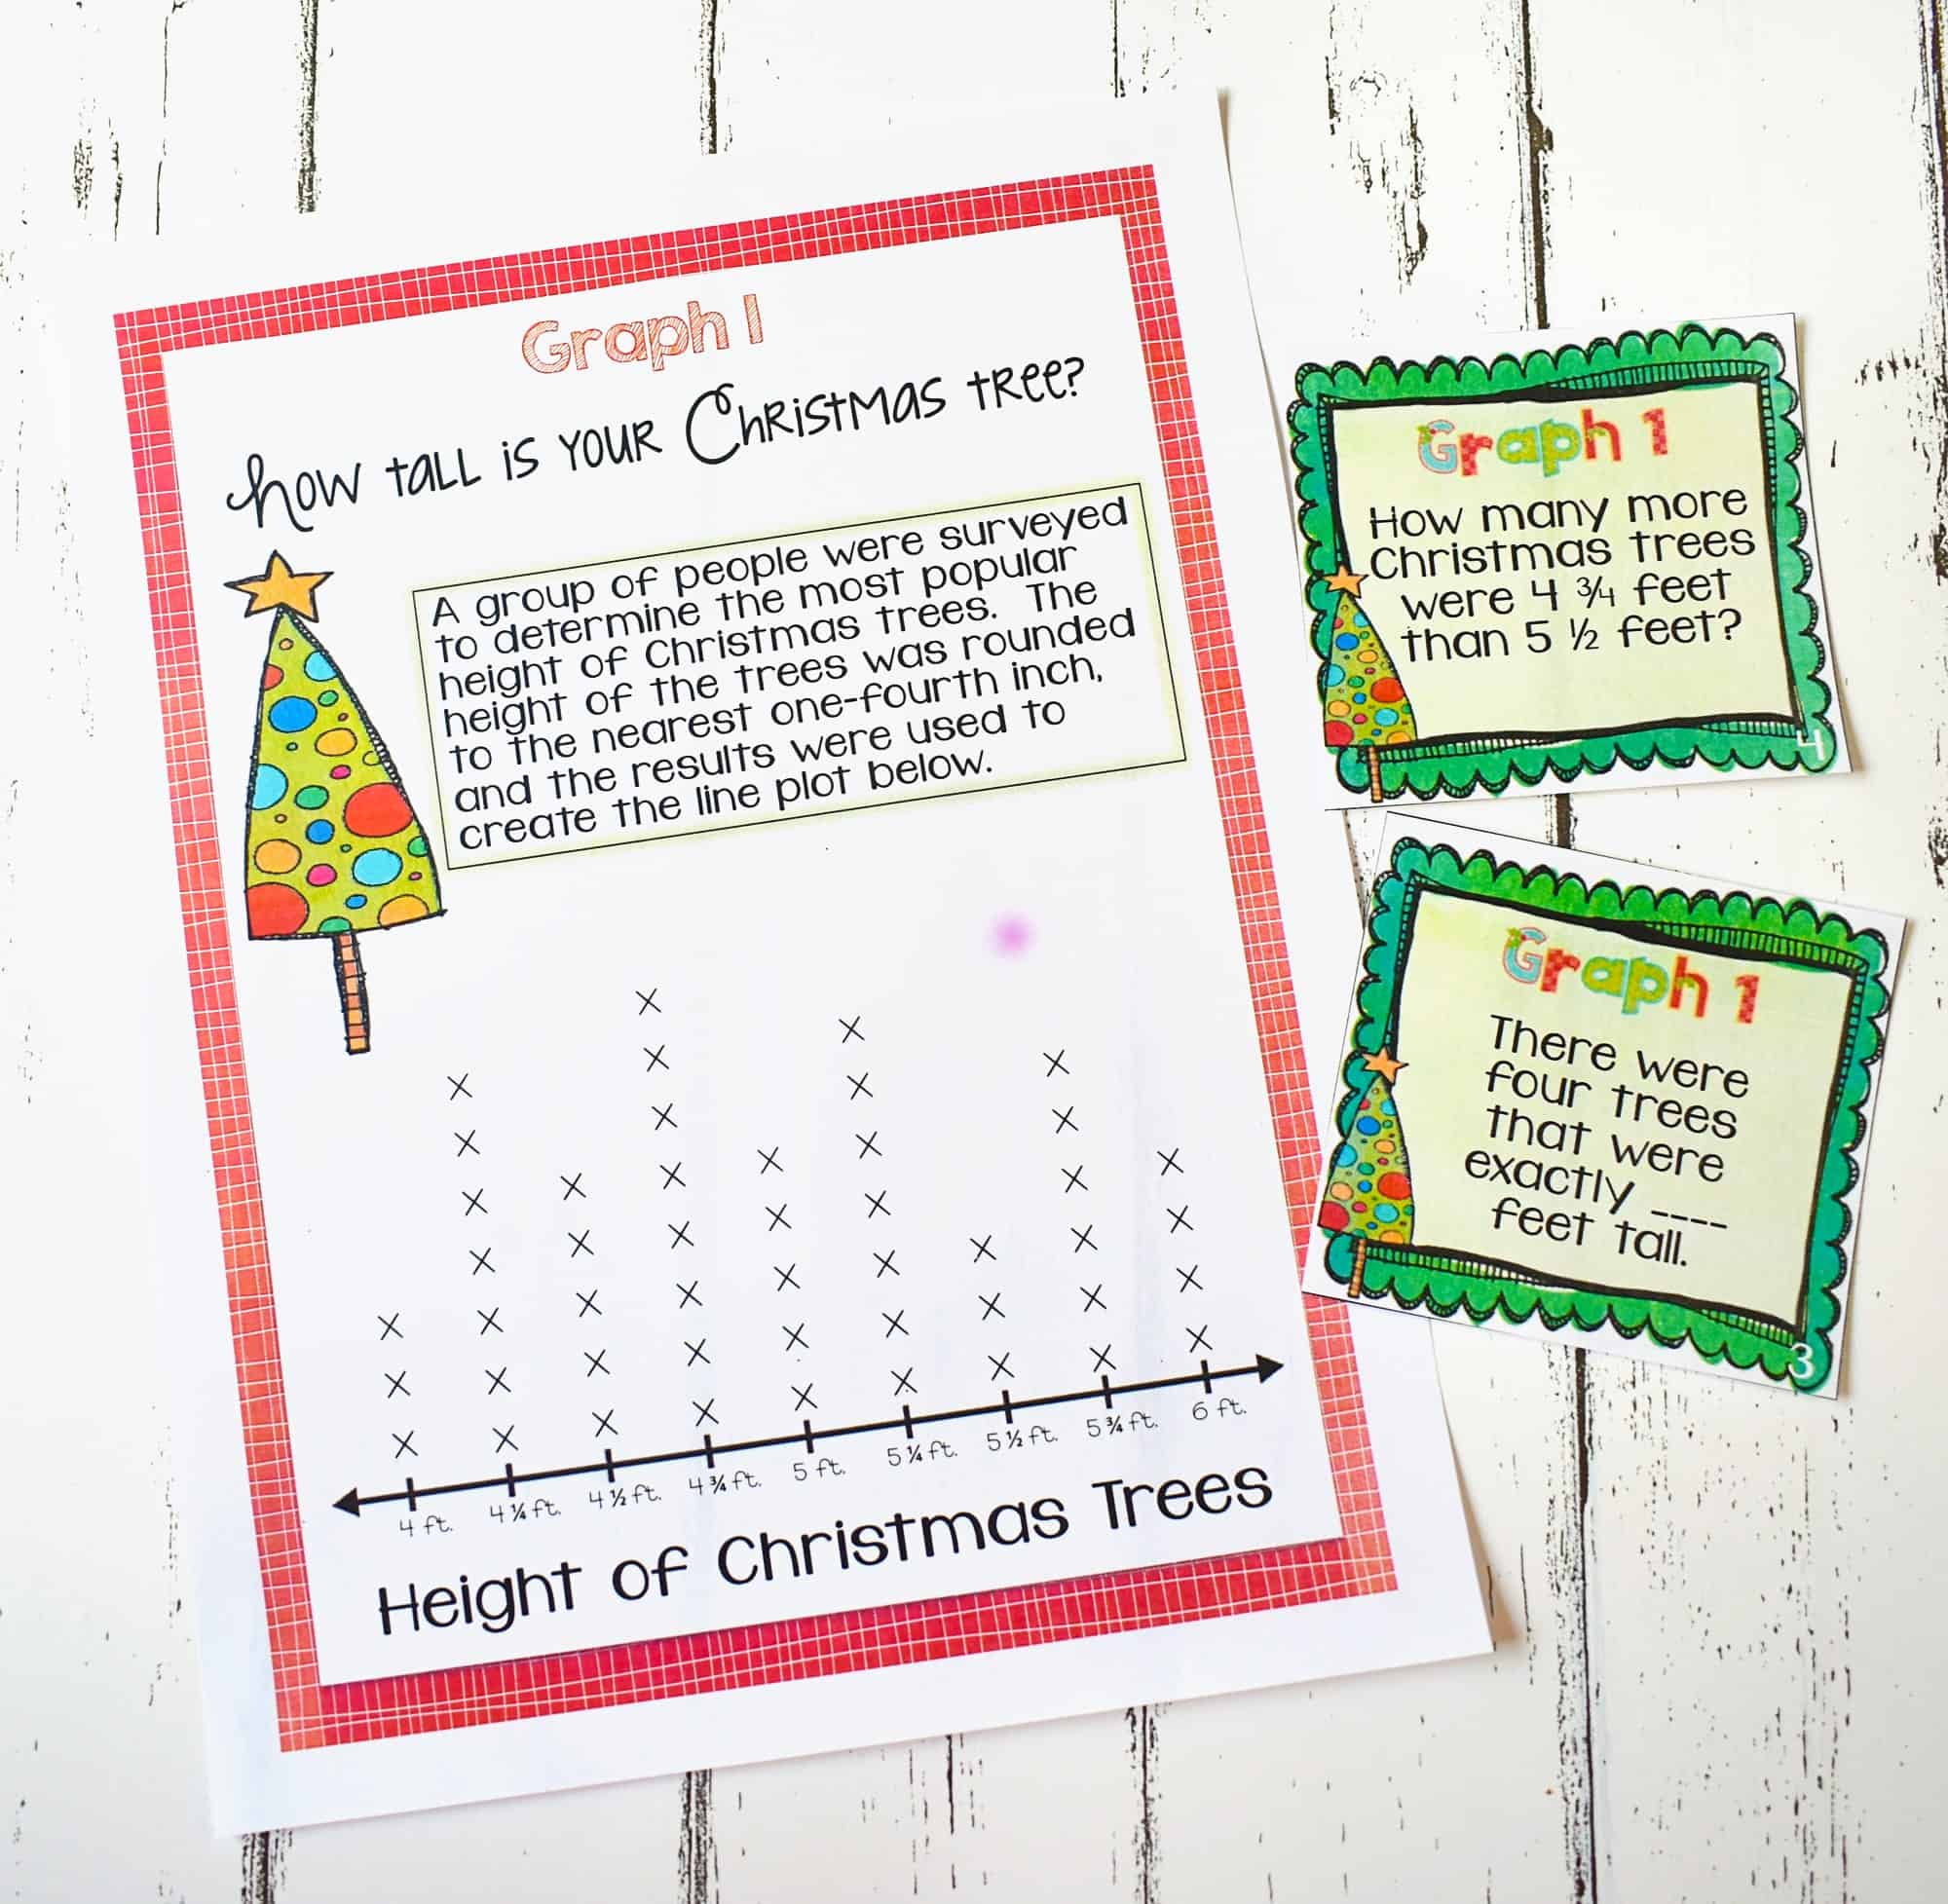 Need some fresh math centers around the winter holidays? I'm sharing a bunch of new Christmas math centers in this blog post! These activities are perfect for a 3rd grade, 4th grade, or 5th grade math classroom. They help your upper elementary students practice Common Core math concepts in engaging and fun ways! Click through to learn more about these fun math centers.